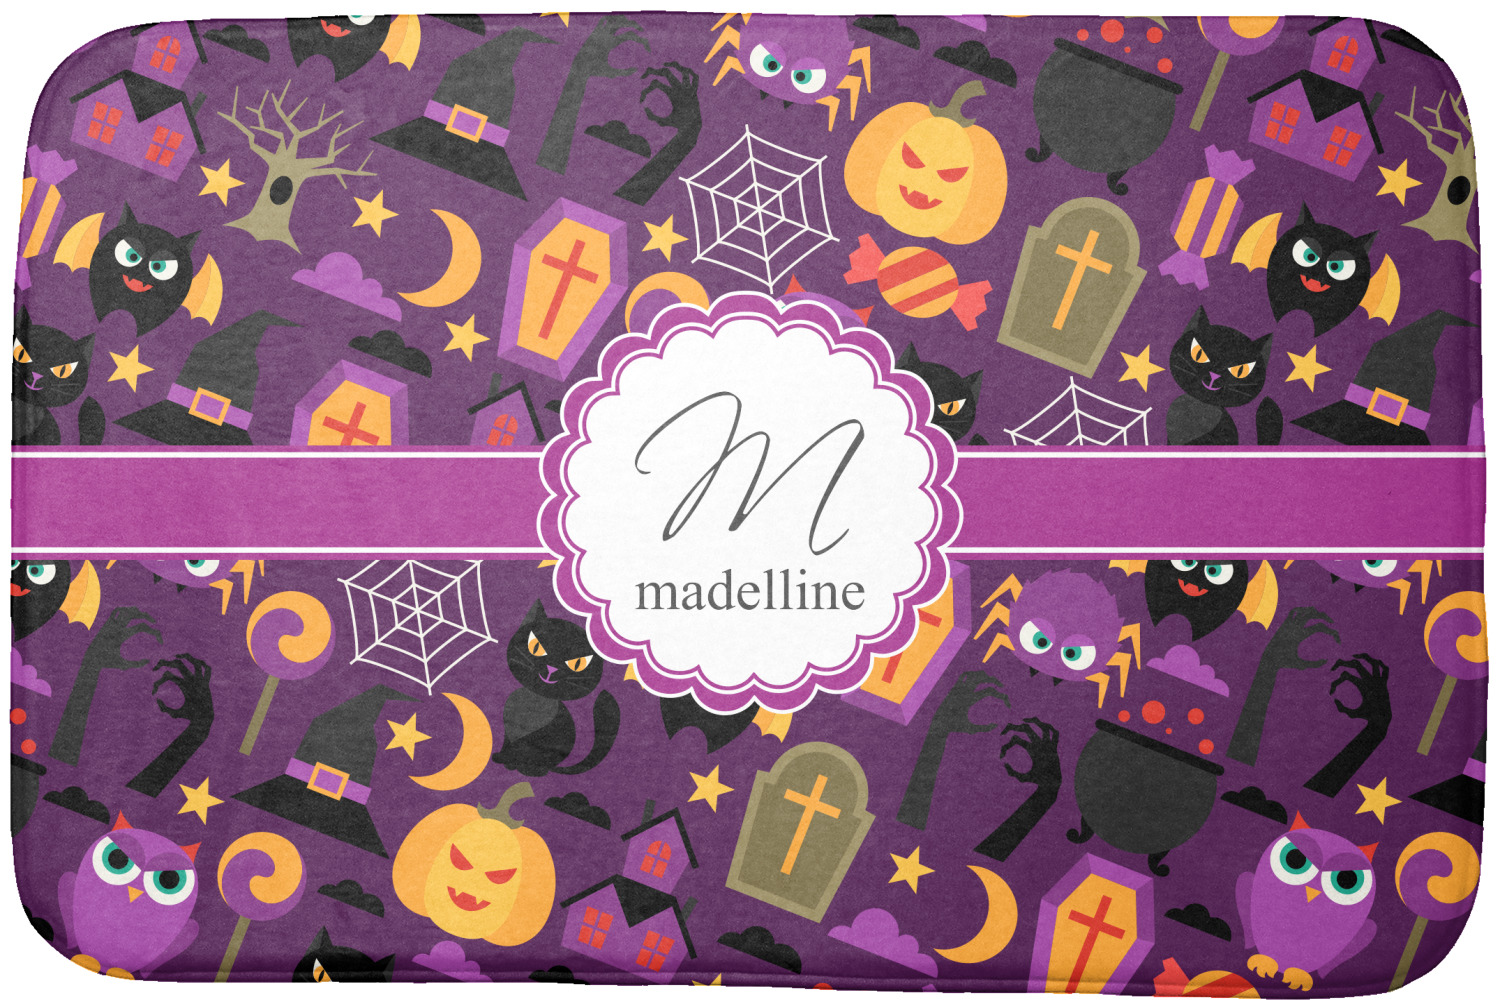 https://www.youcustomizeit.com/common/MAKE/276281/Halloween-Dish-Drying-Mat-Approval.jpg?lm=1682006429